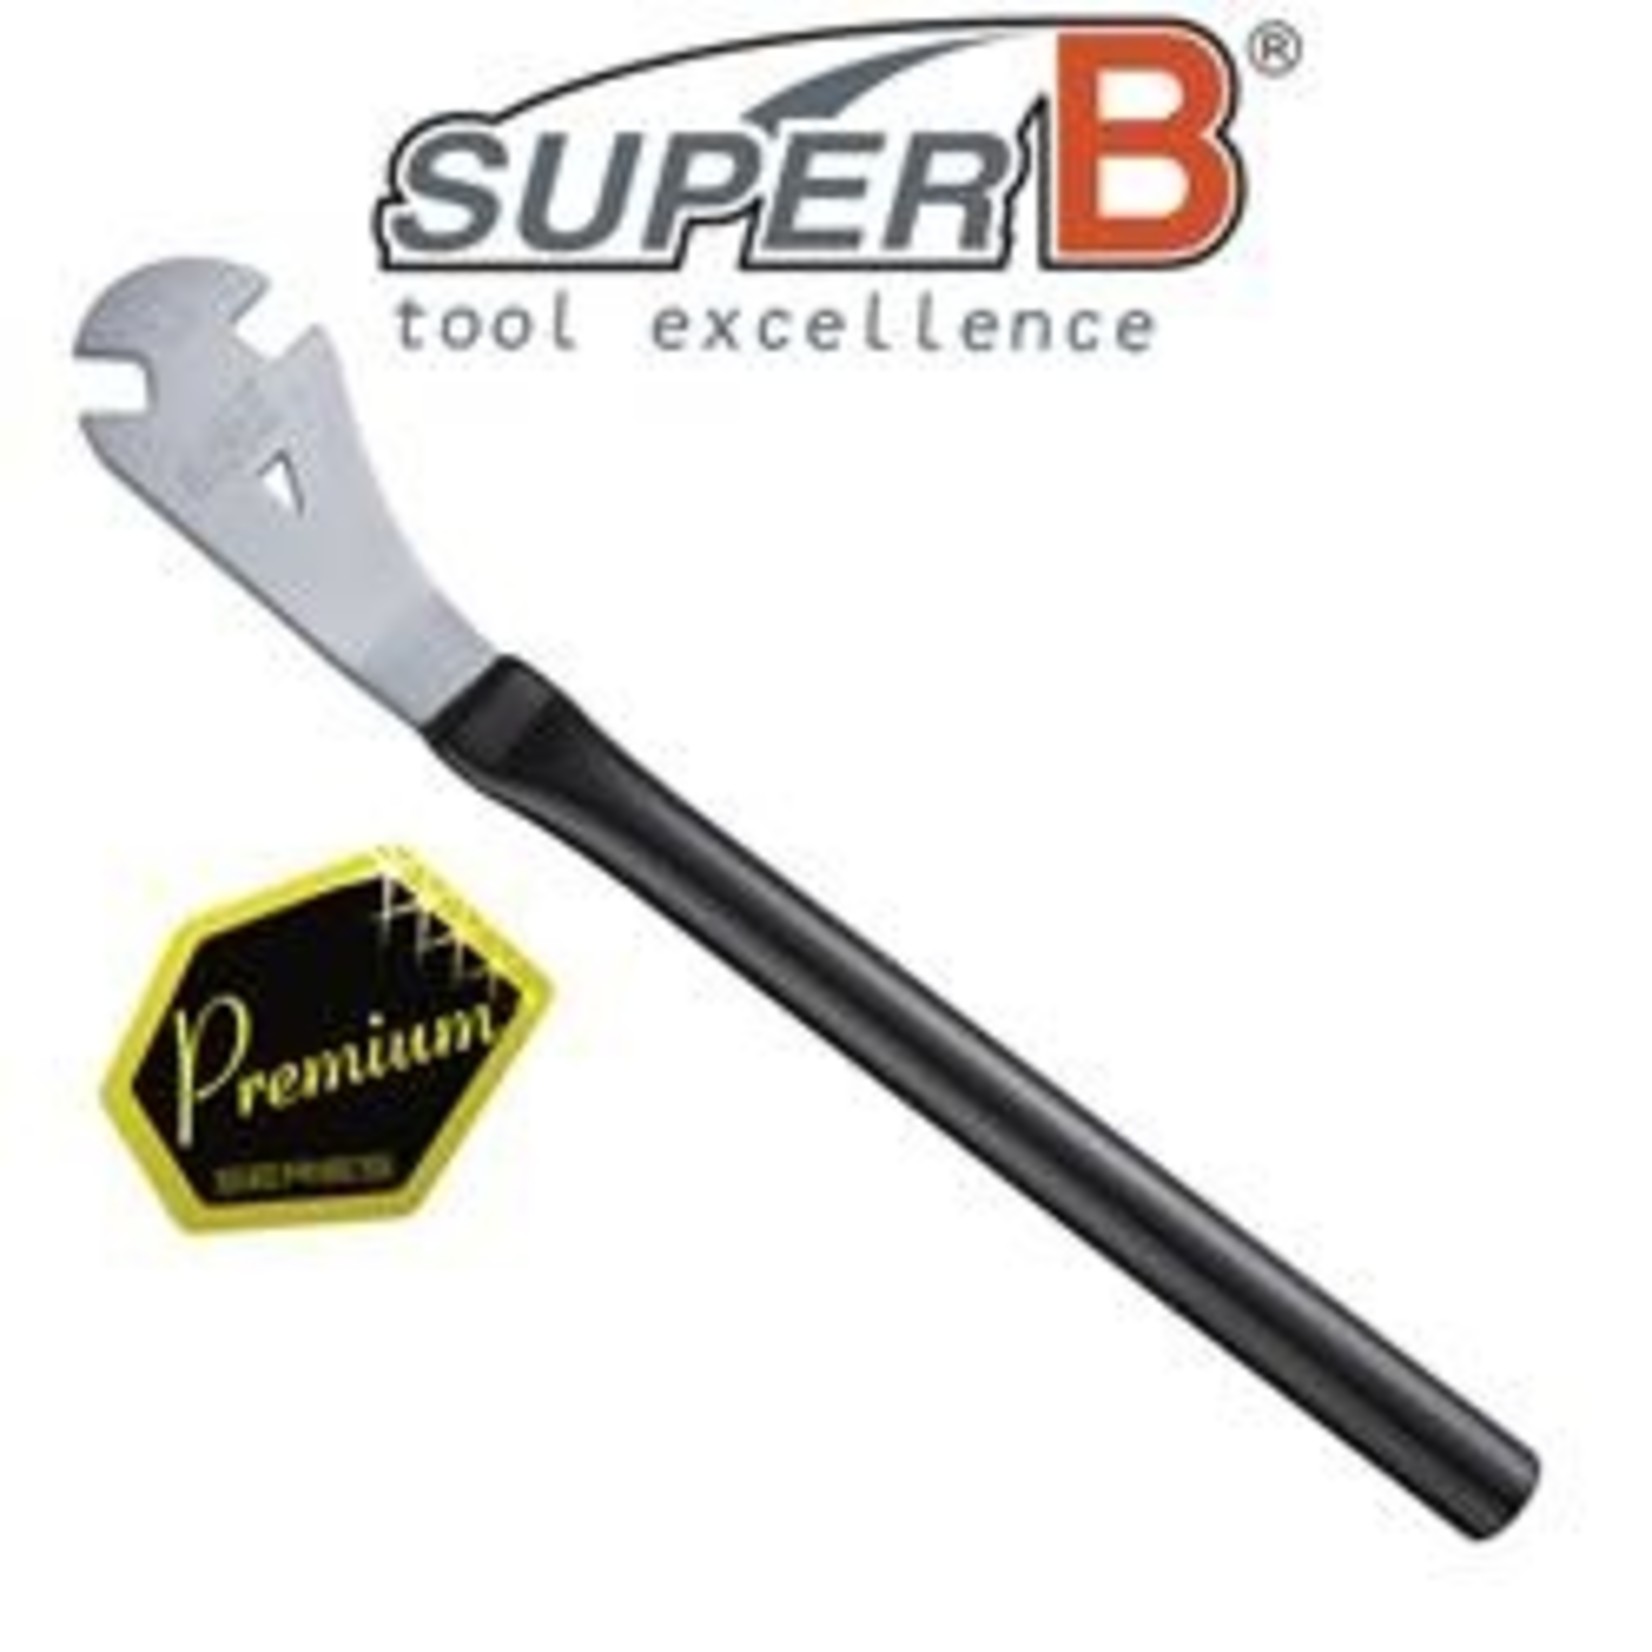 Super B SuperB Professional Pedal Wrench - Extra Long Handle - Bike Tool